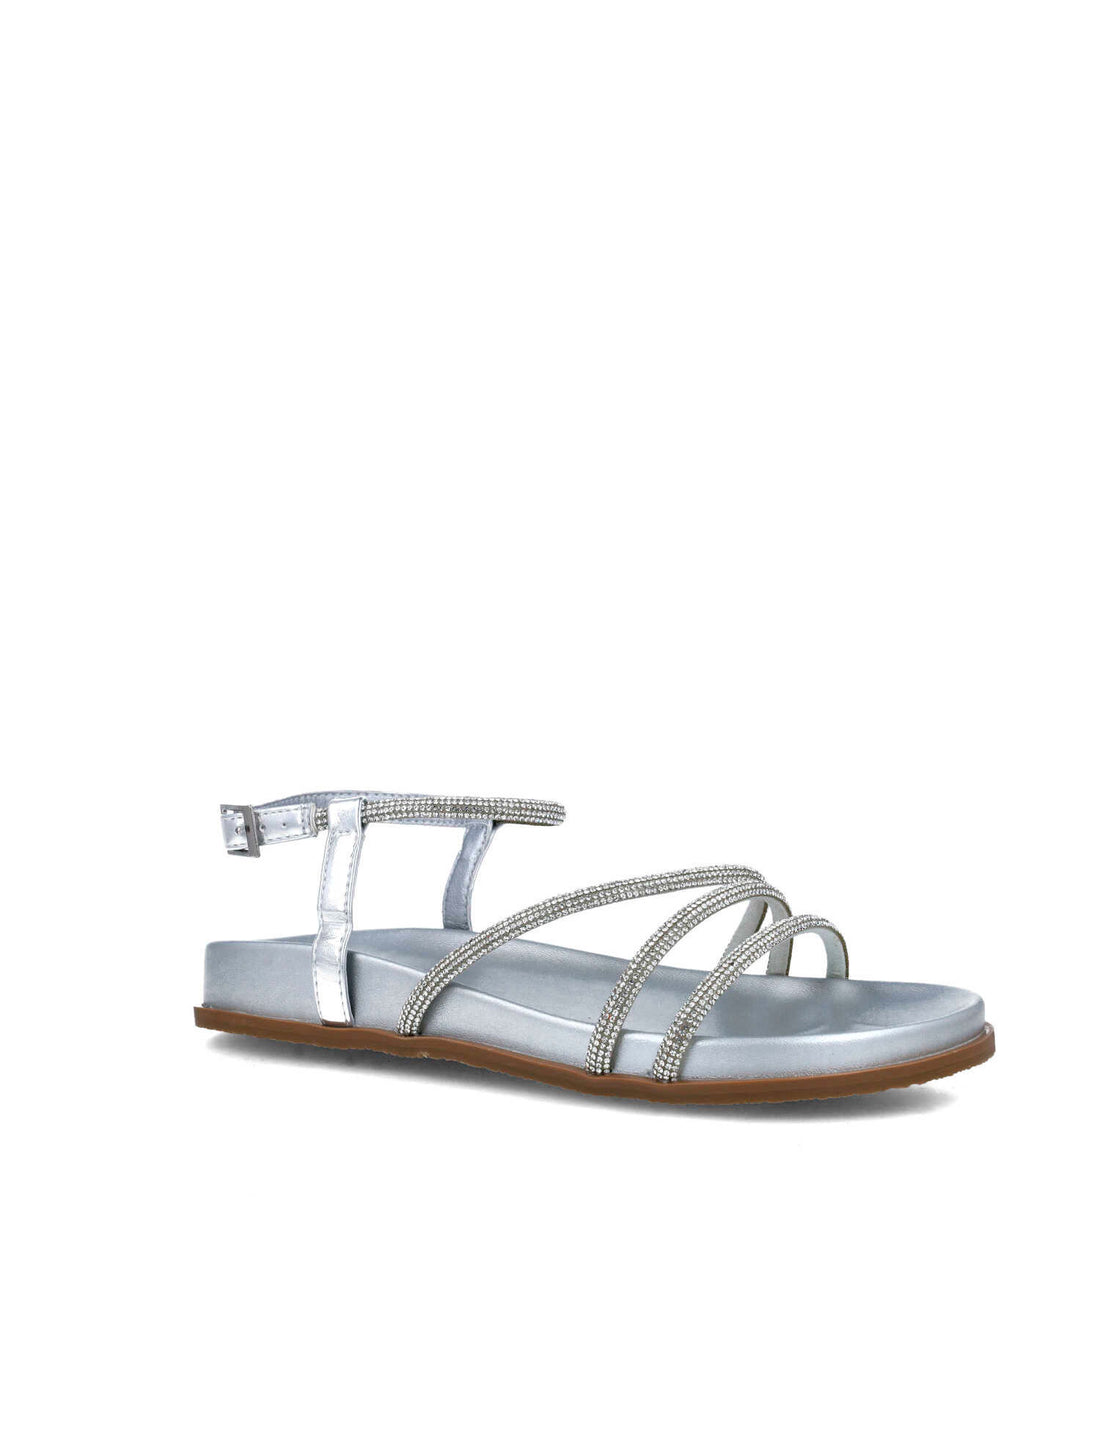 Silver Flat Sandals With Embellished Ankle Strap_24876_09_02